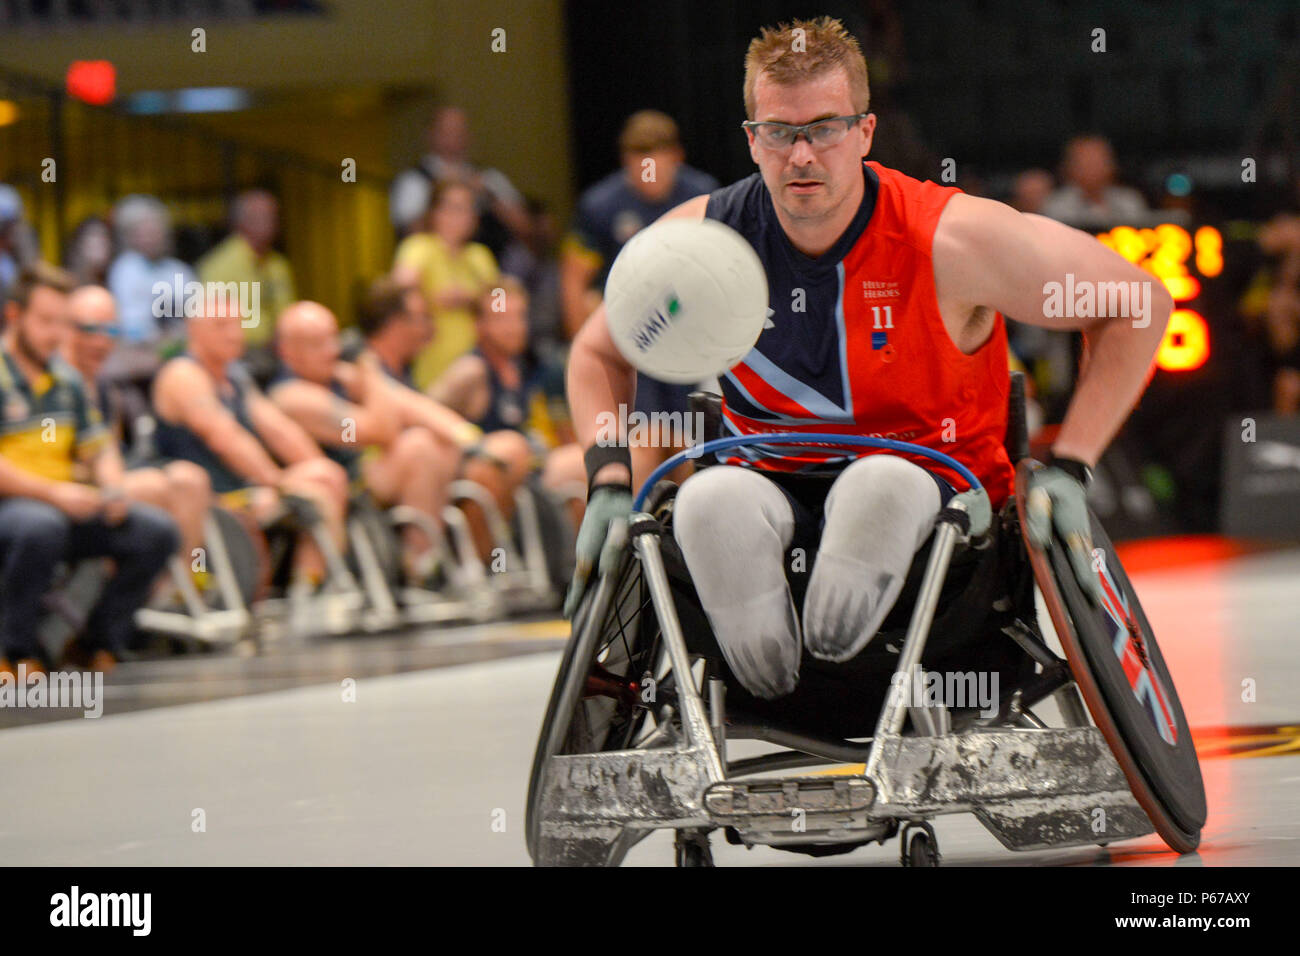 160511-F-WU507-150: The Team UK captain rushes the ball down the court during the UK versus Australia wheel chair basketball bronze metal match at the 2016 Invictus Games, at the ESPN Wide World of Sports complex at Walt Disney World, Orlando, Fla., May 11, 2016. The UK beat Australia 47-4 to take bronze; the US beat Denmark 28-19, and took gold; Denmark took silver. (U.S. Air Force photo by Senior Master Sgt. Kevin Wallace/RELEASED) Stock Photo